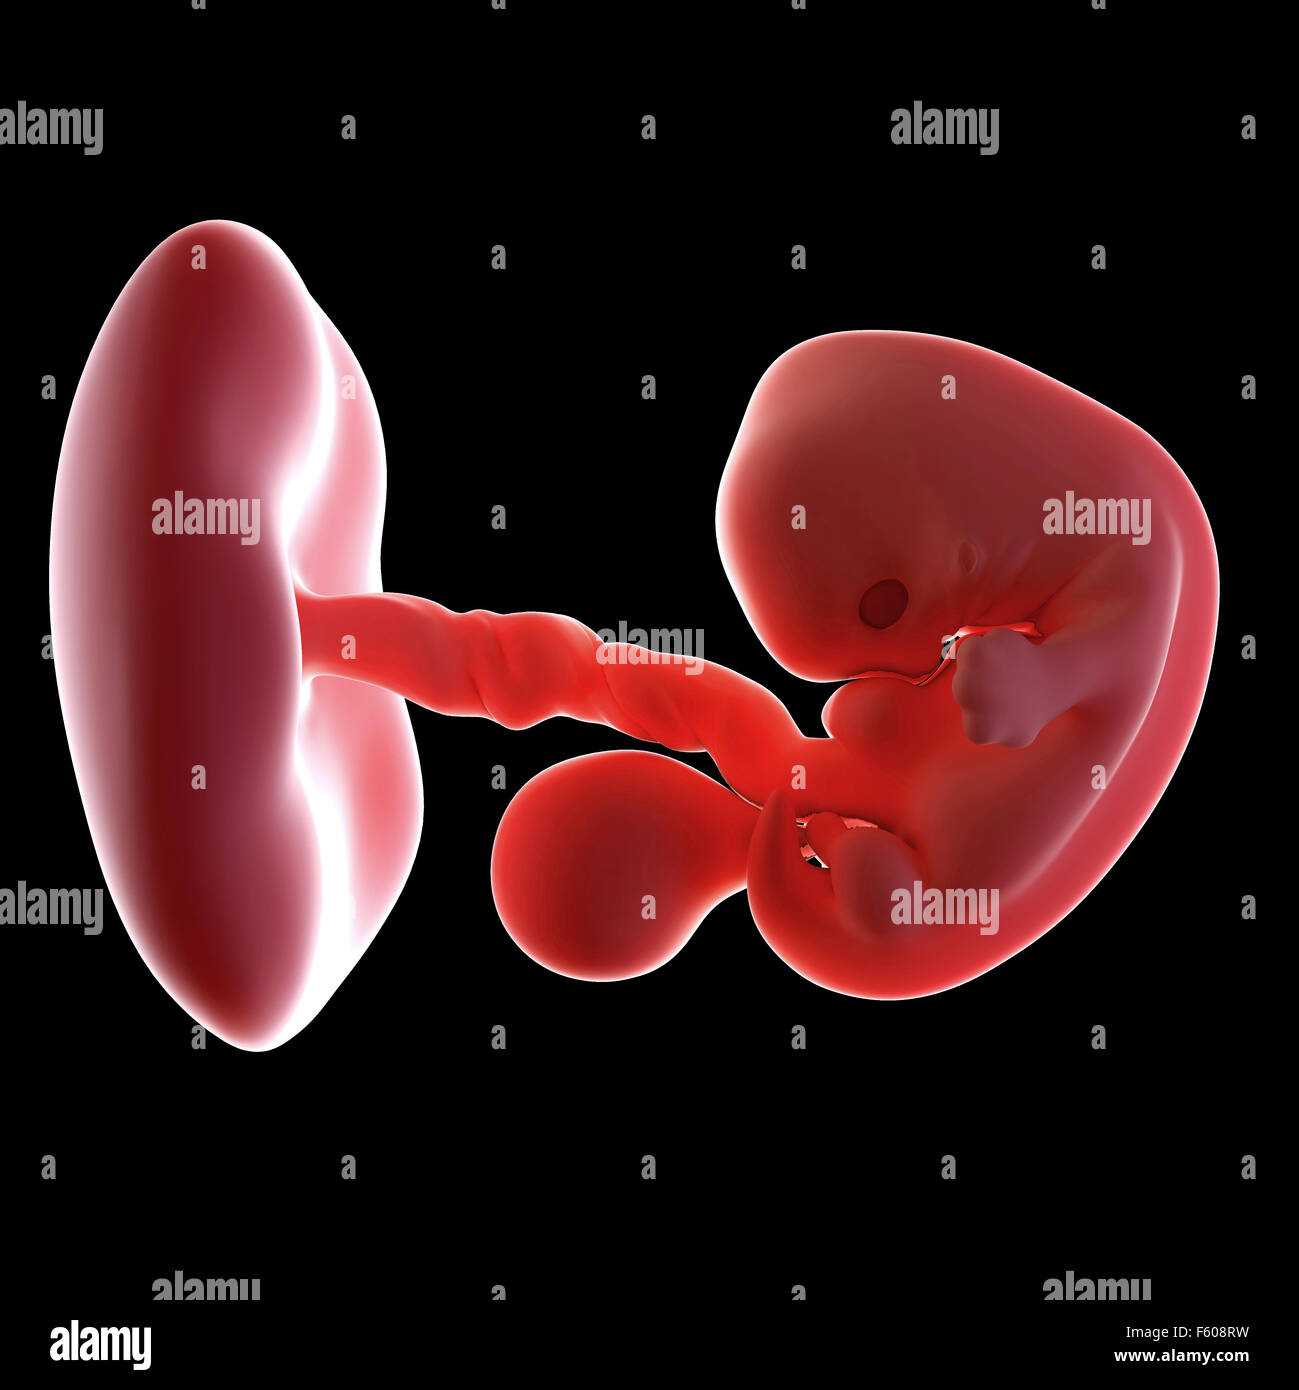 medical accurate illustration of an embryo week 7 Stock Photo